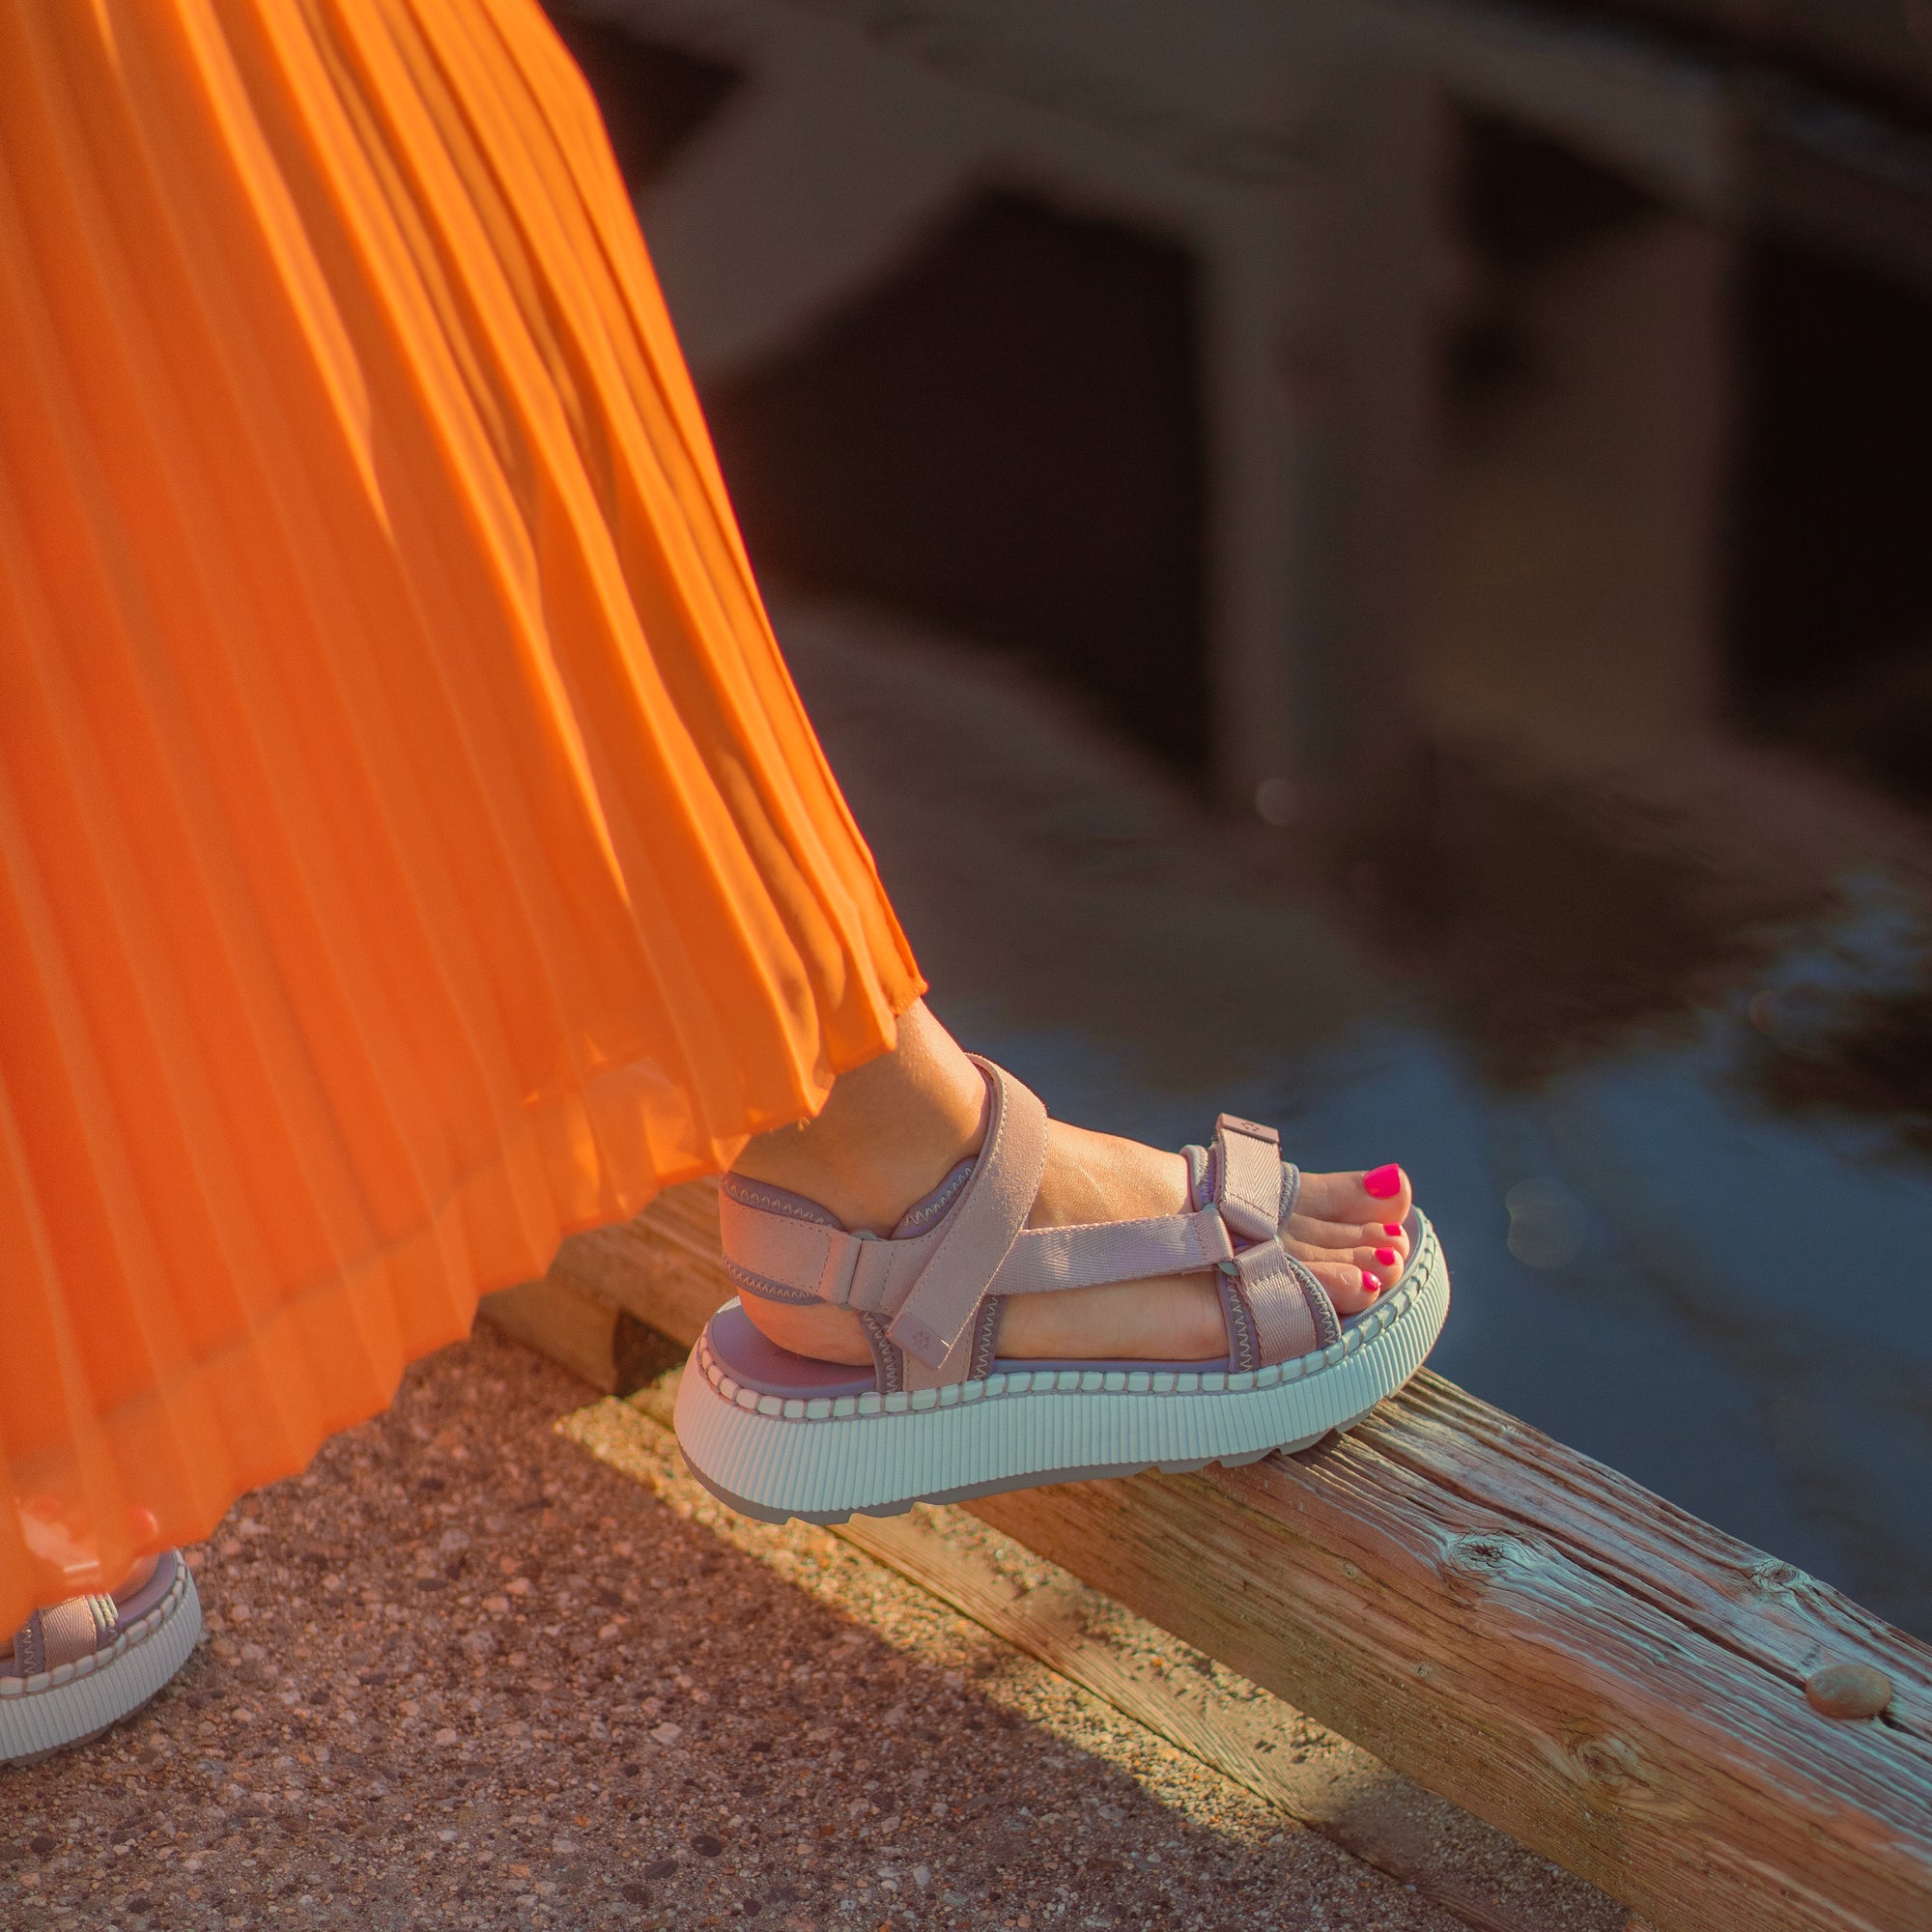 Spray Luxmotion Nylon and Suede Water-Friendly Sandal - Colour Blush